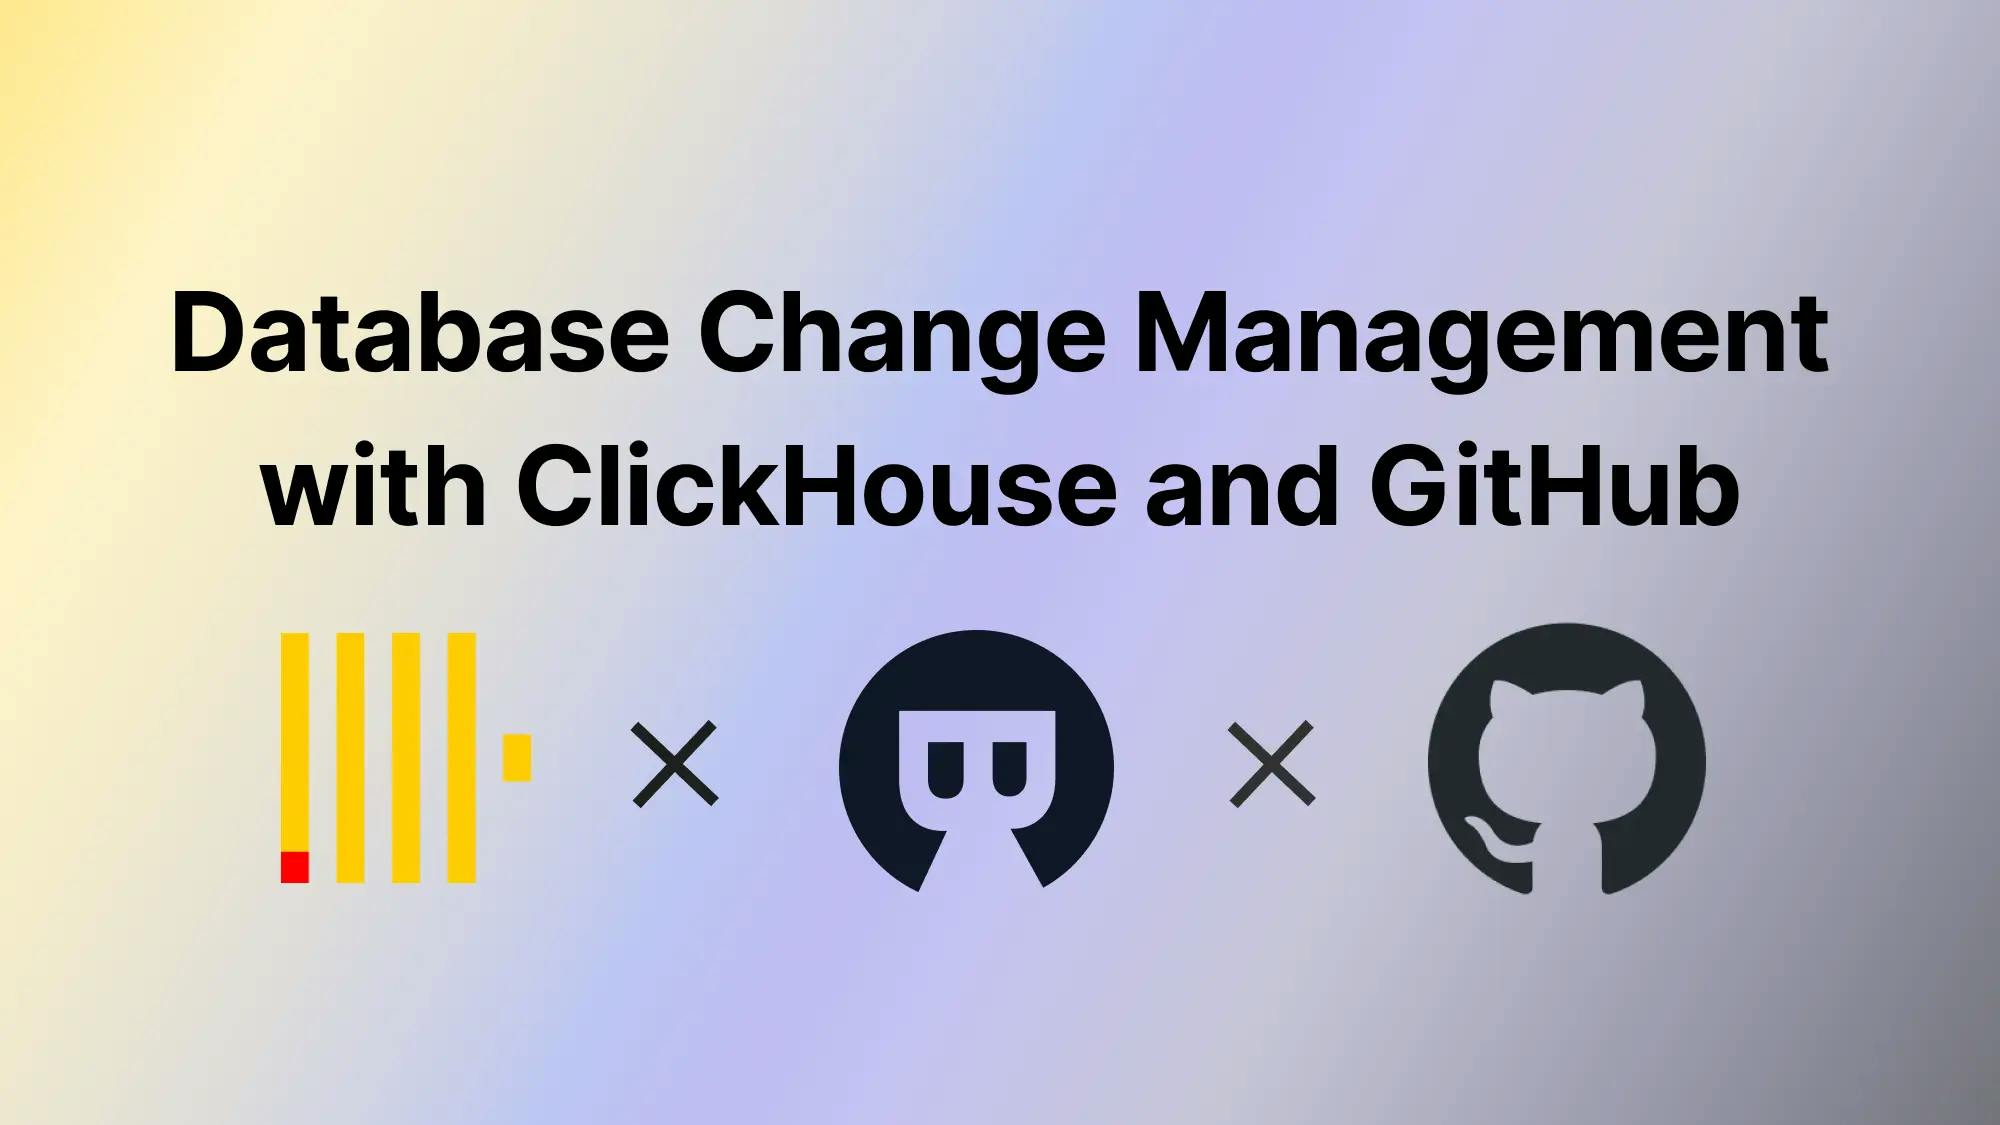 DevOps: Database Change Management with ClickHouse and GitHub